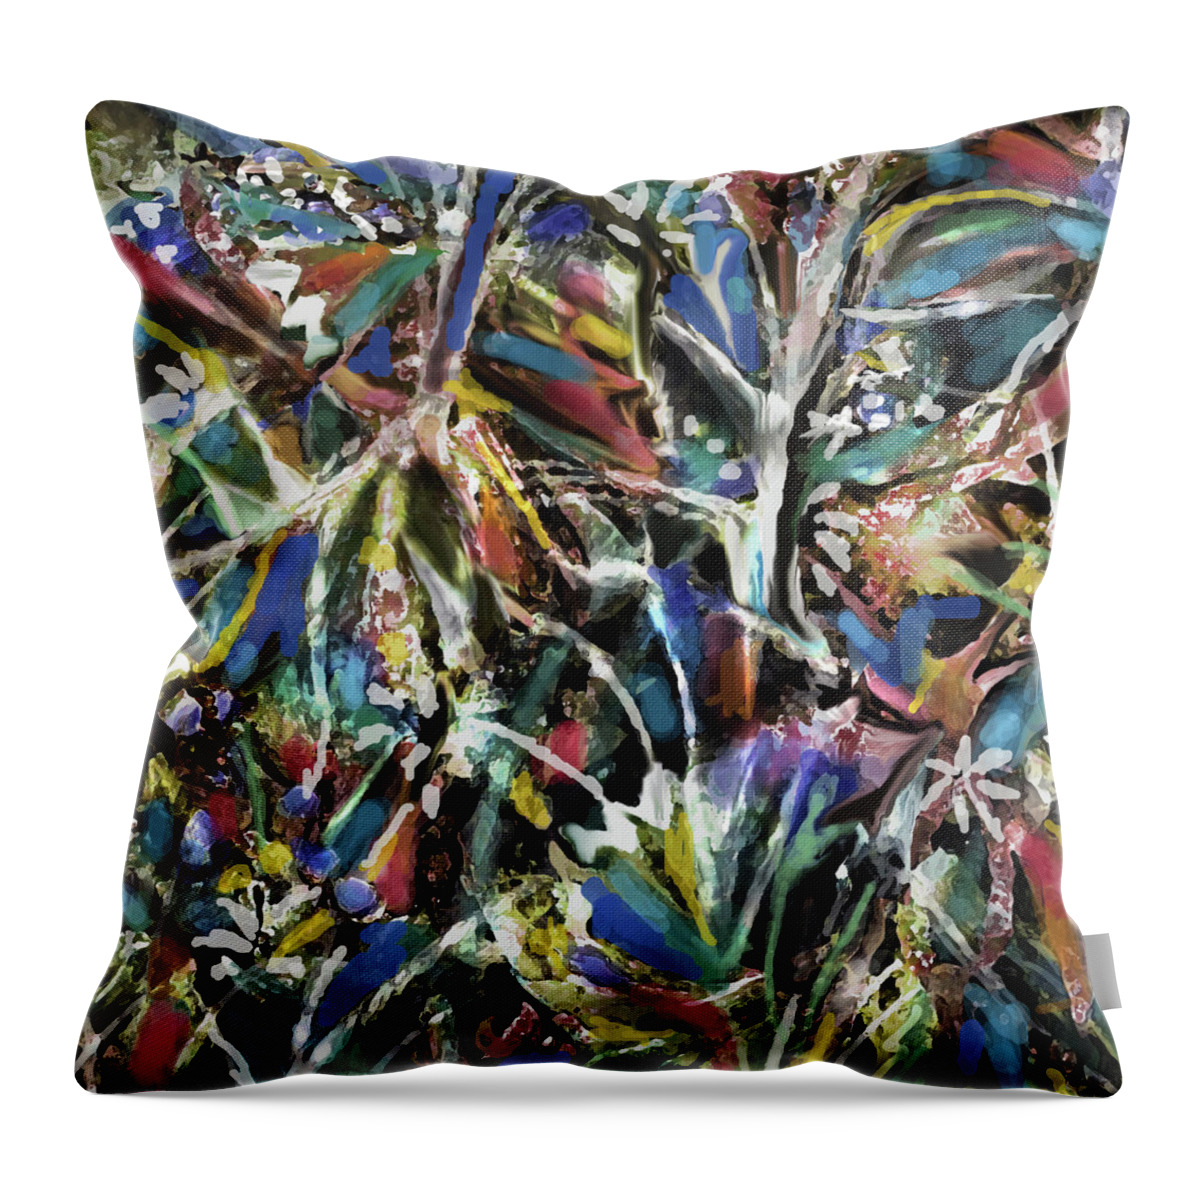 Colorful Abstract Throw Pillow featuring the painting Flower Nebula by Jean Batzell Fitzgerald